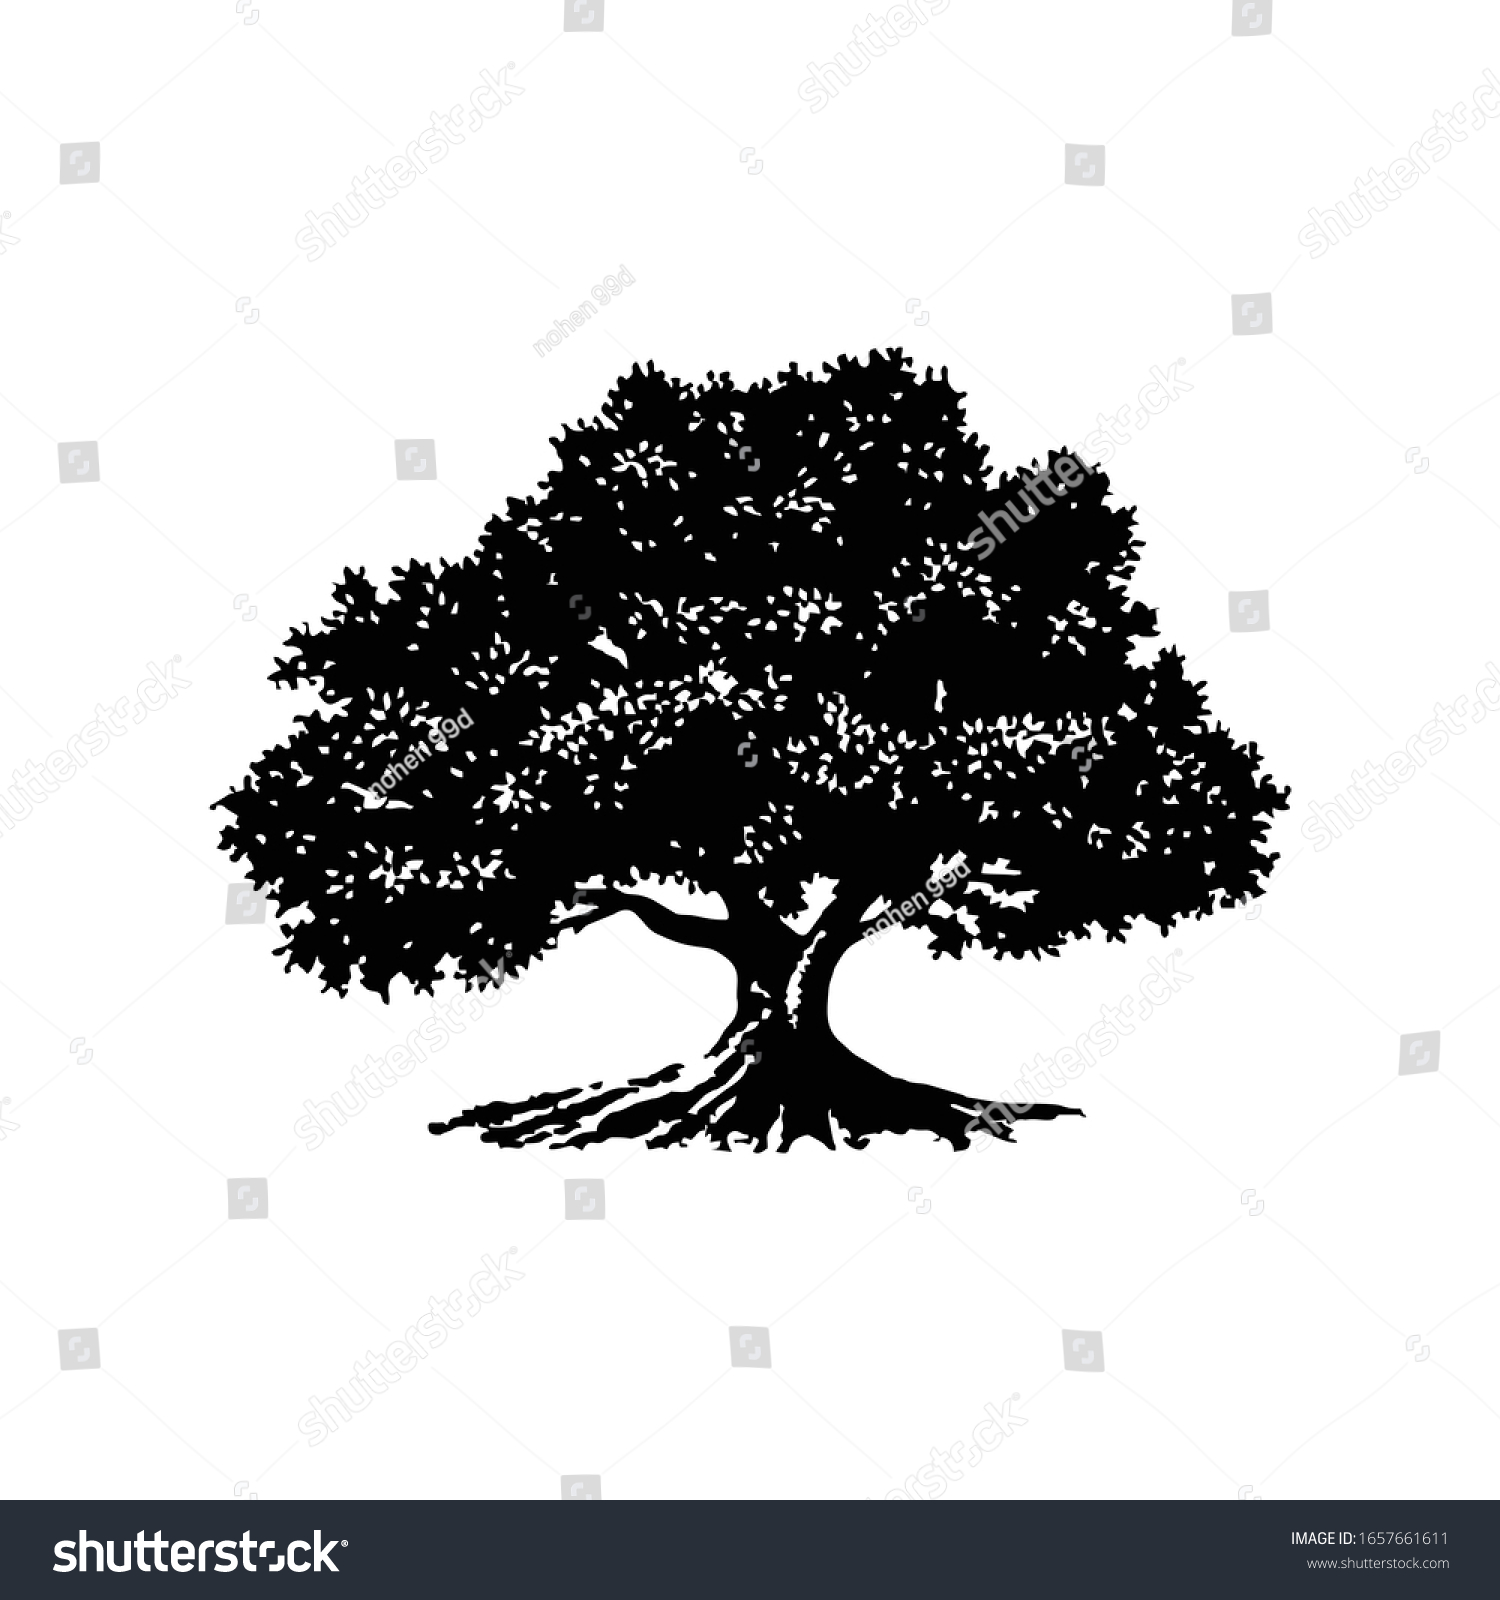 SVG of vector image with theme Banyan Tree svg